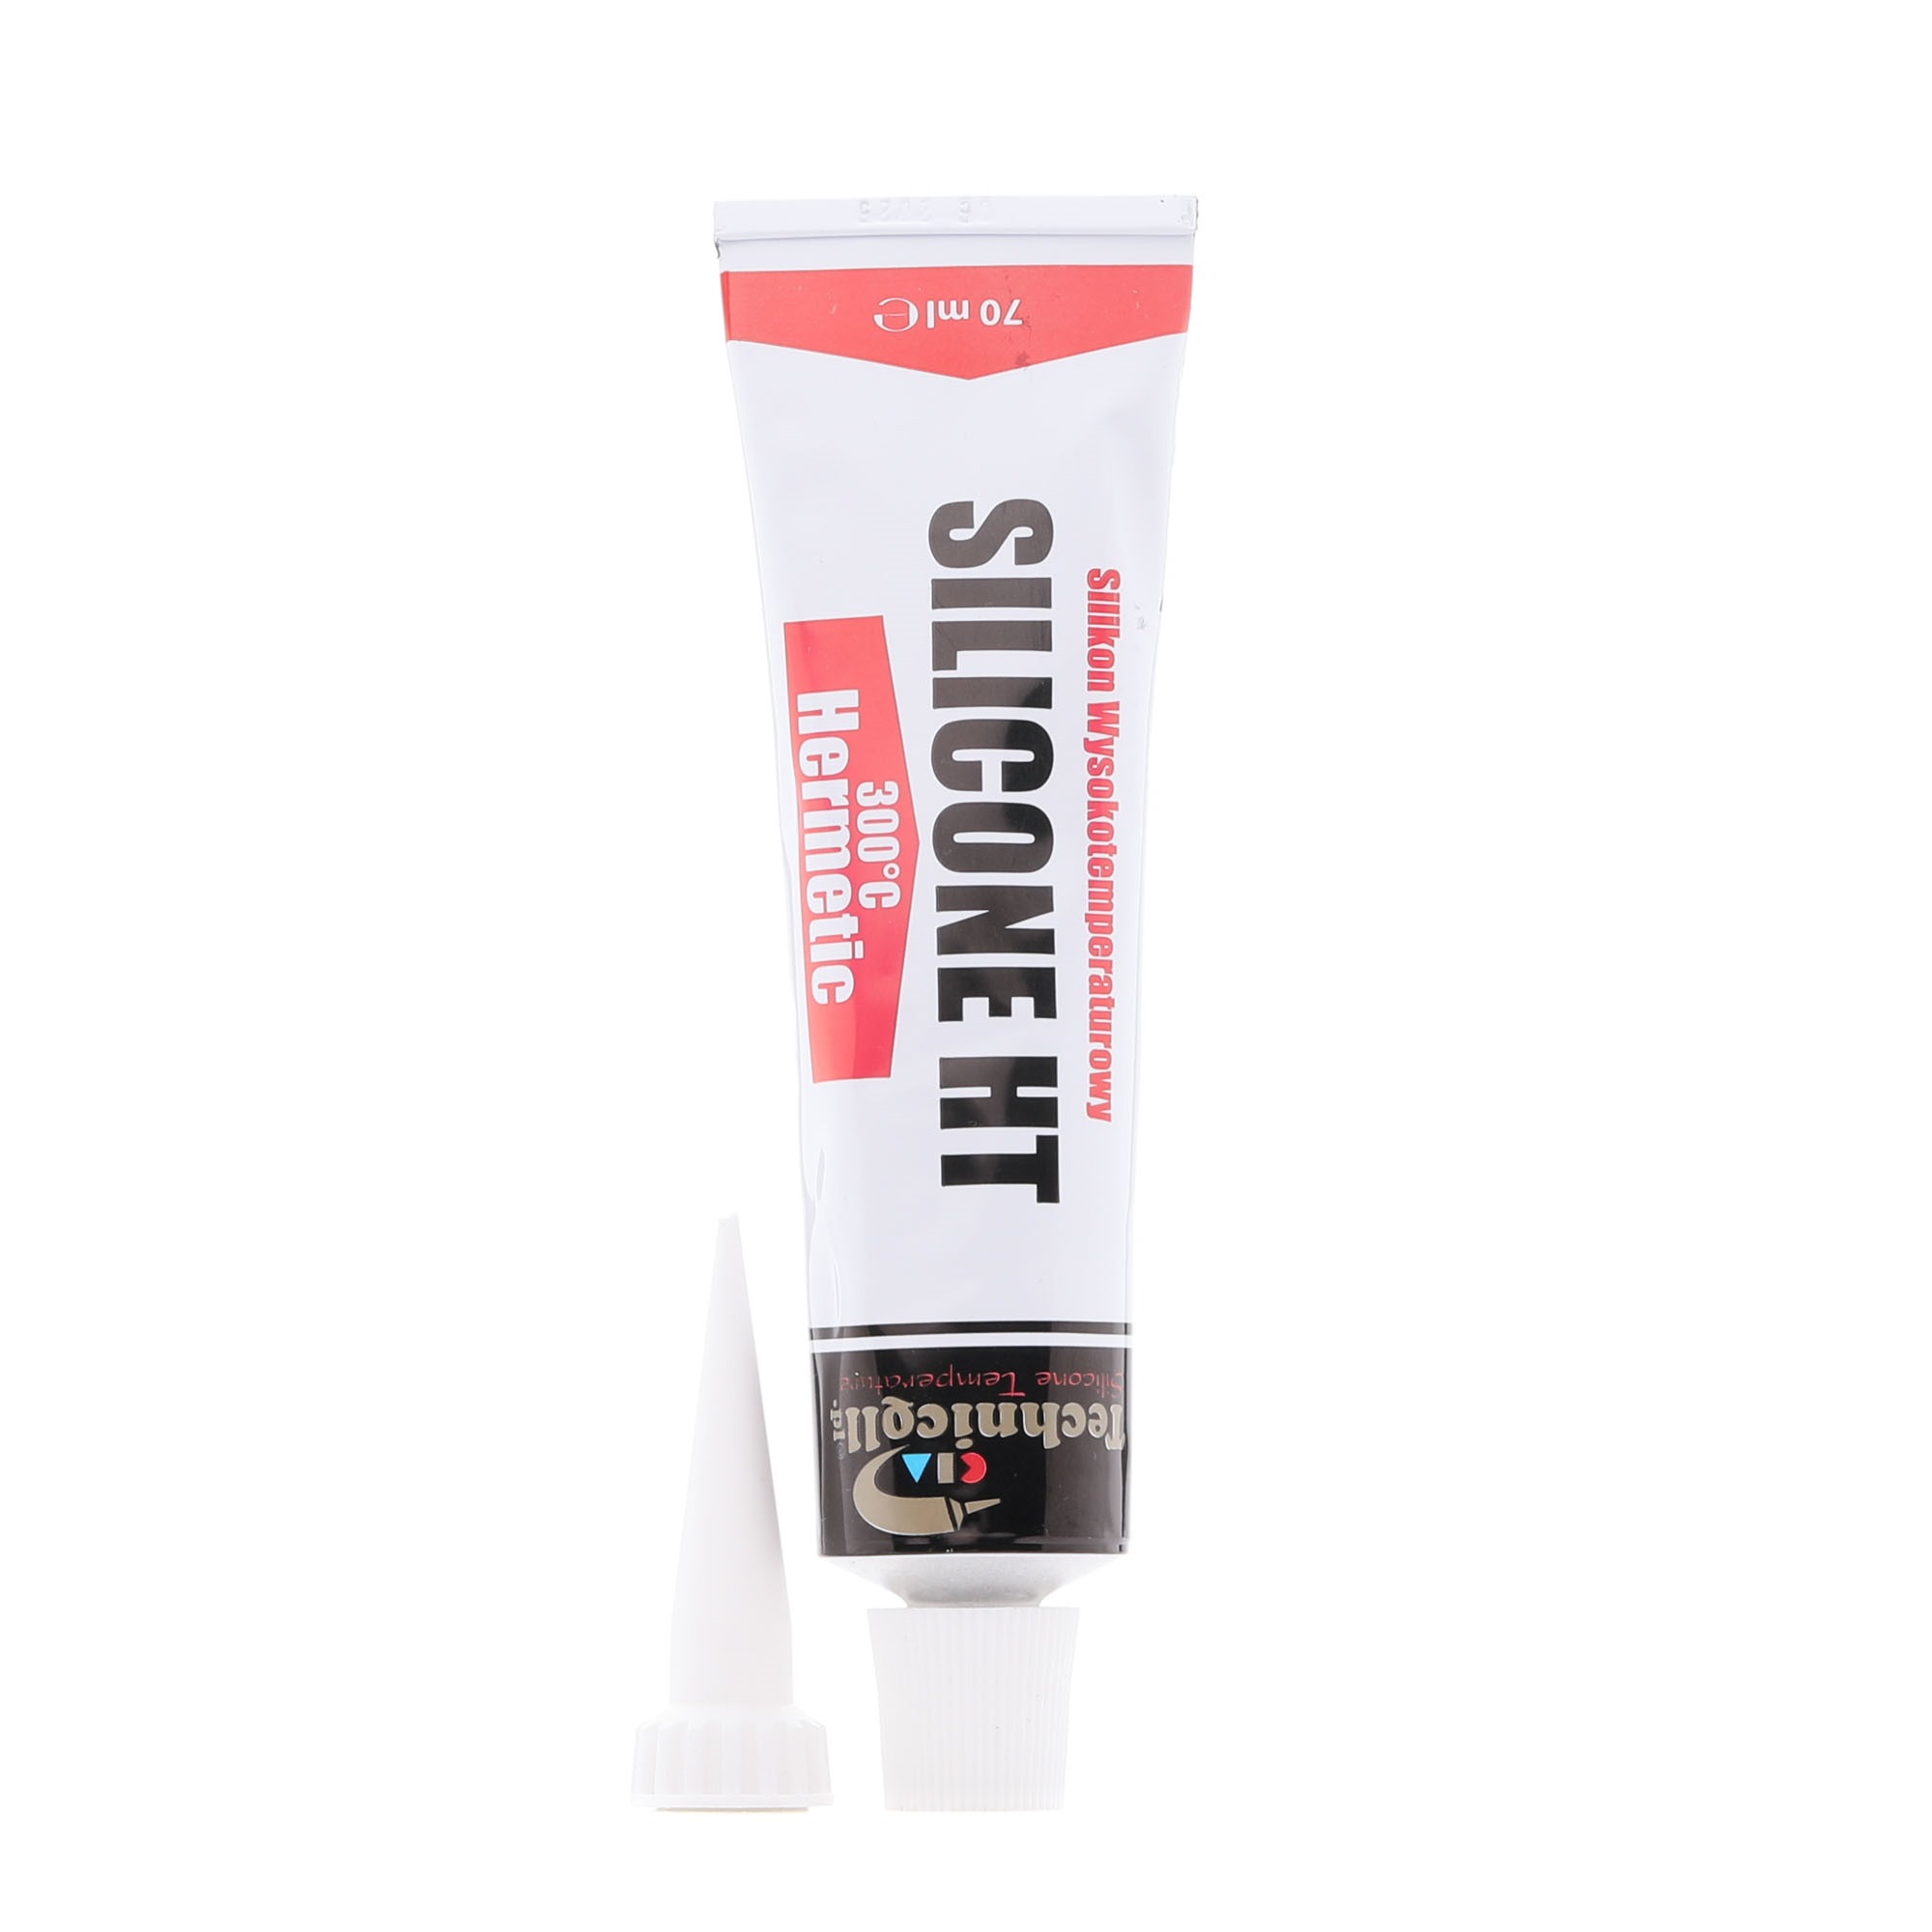 TECHNICQLL S556 Sealant for engine block -60/ +300 °C°C, Capacity: 70ml, Contains silicate, Heat-resistant, black